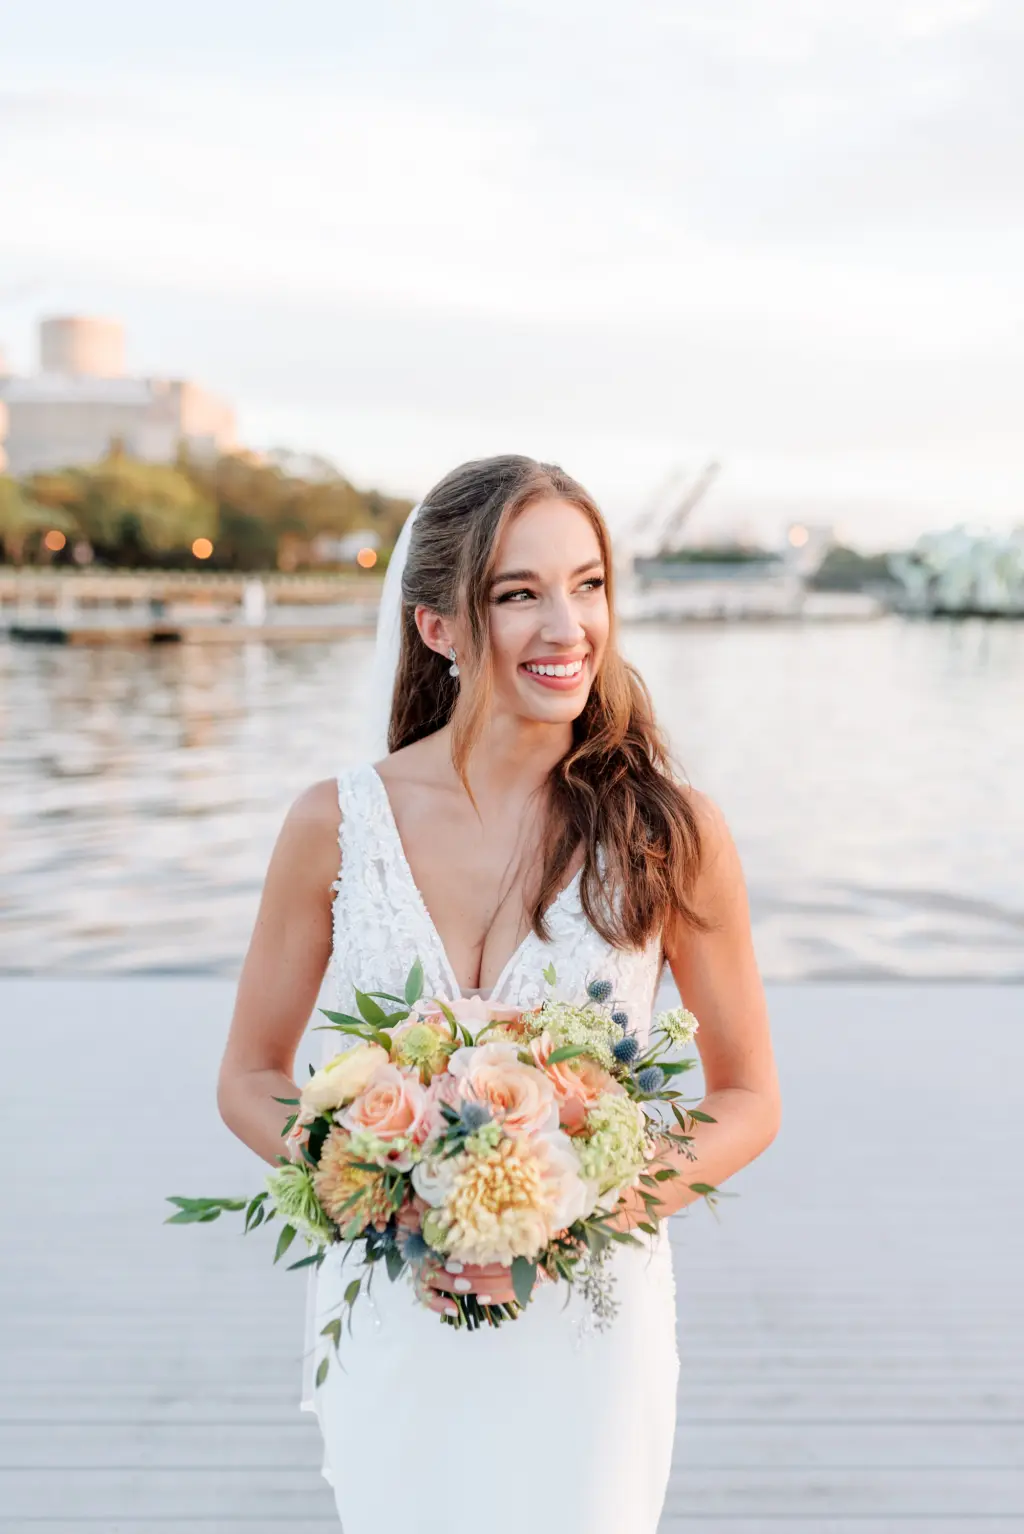 Elegant Hair and Makeup Ideas | Peach Orange Roses and Greenery Bridal Bouquet